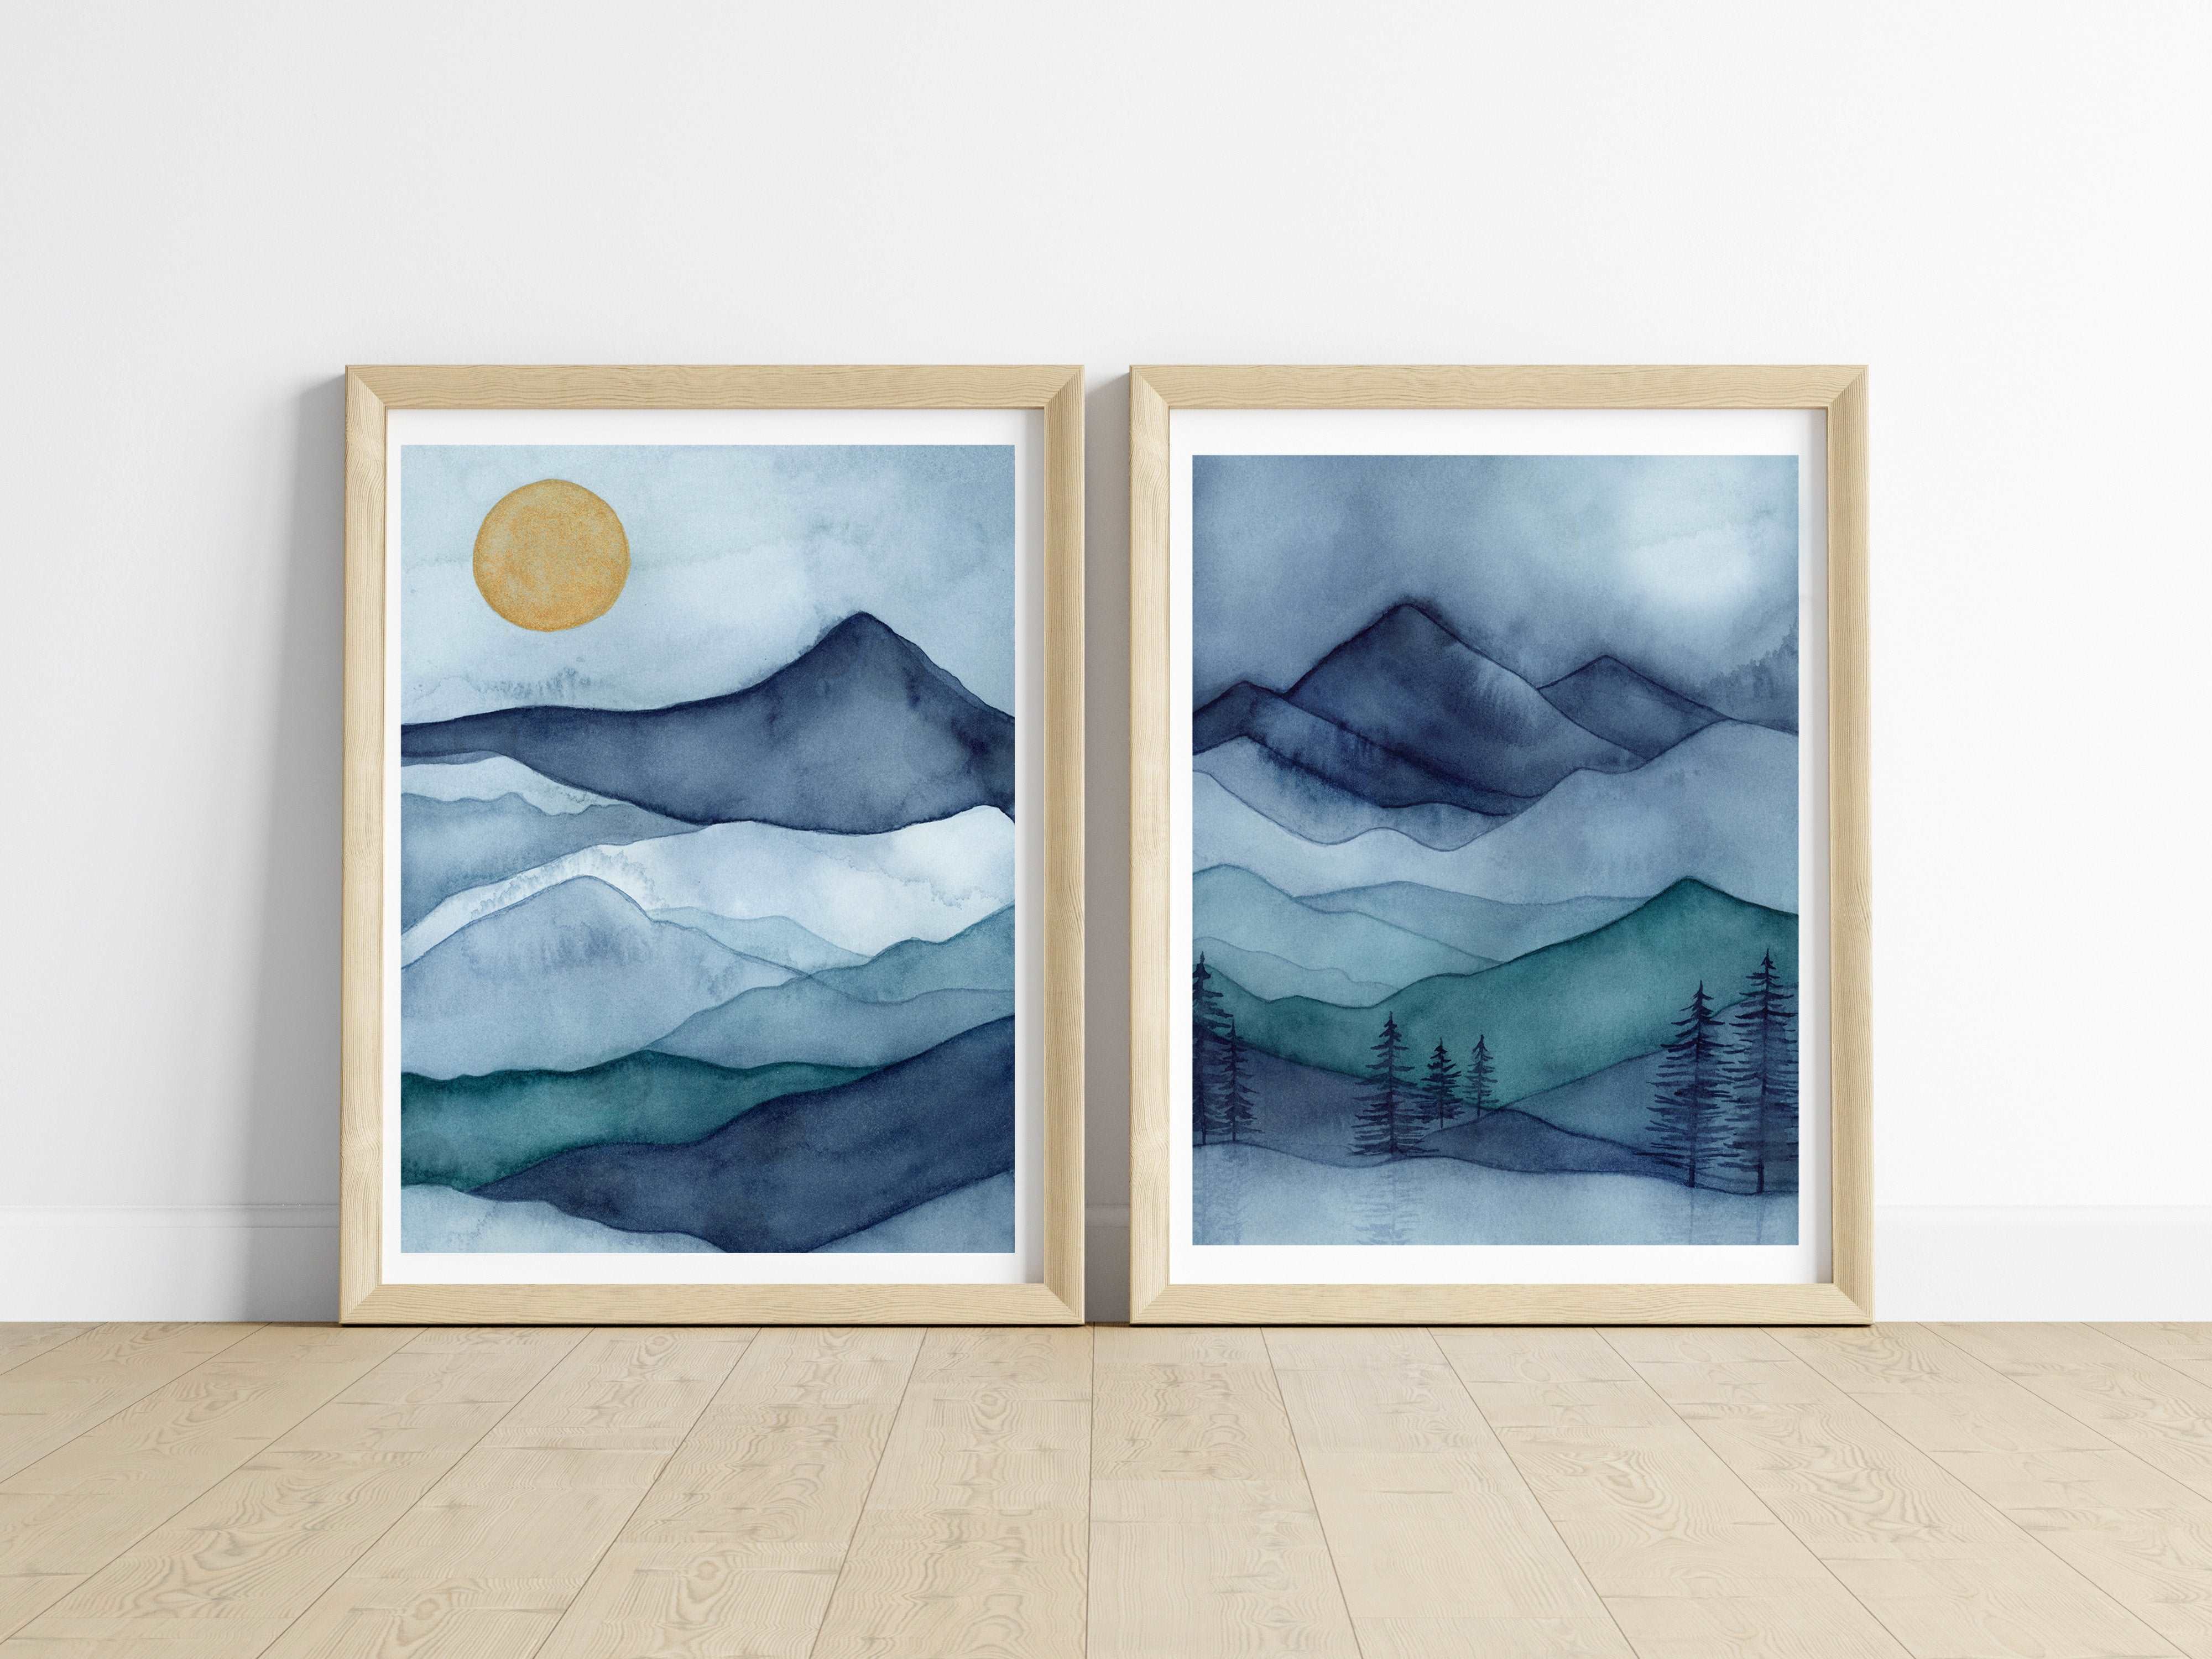 Misty Mountains 1 & 2 Duo (Set of 2 prints)